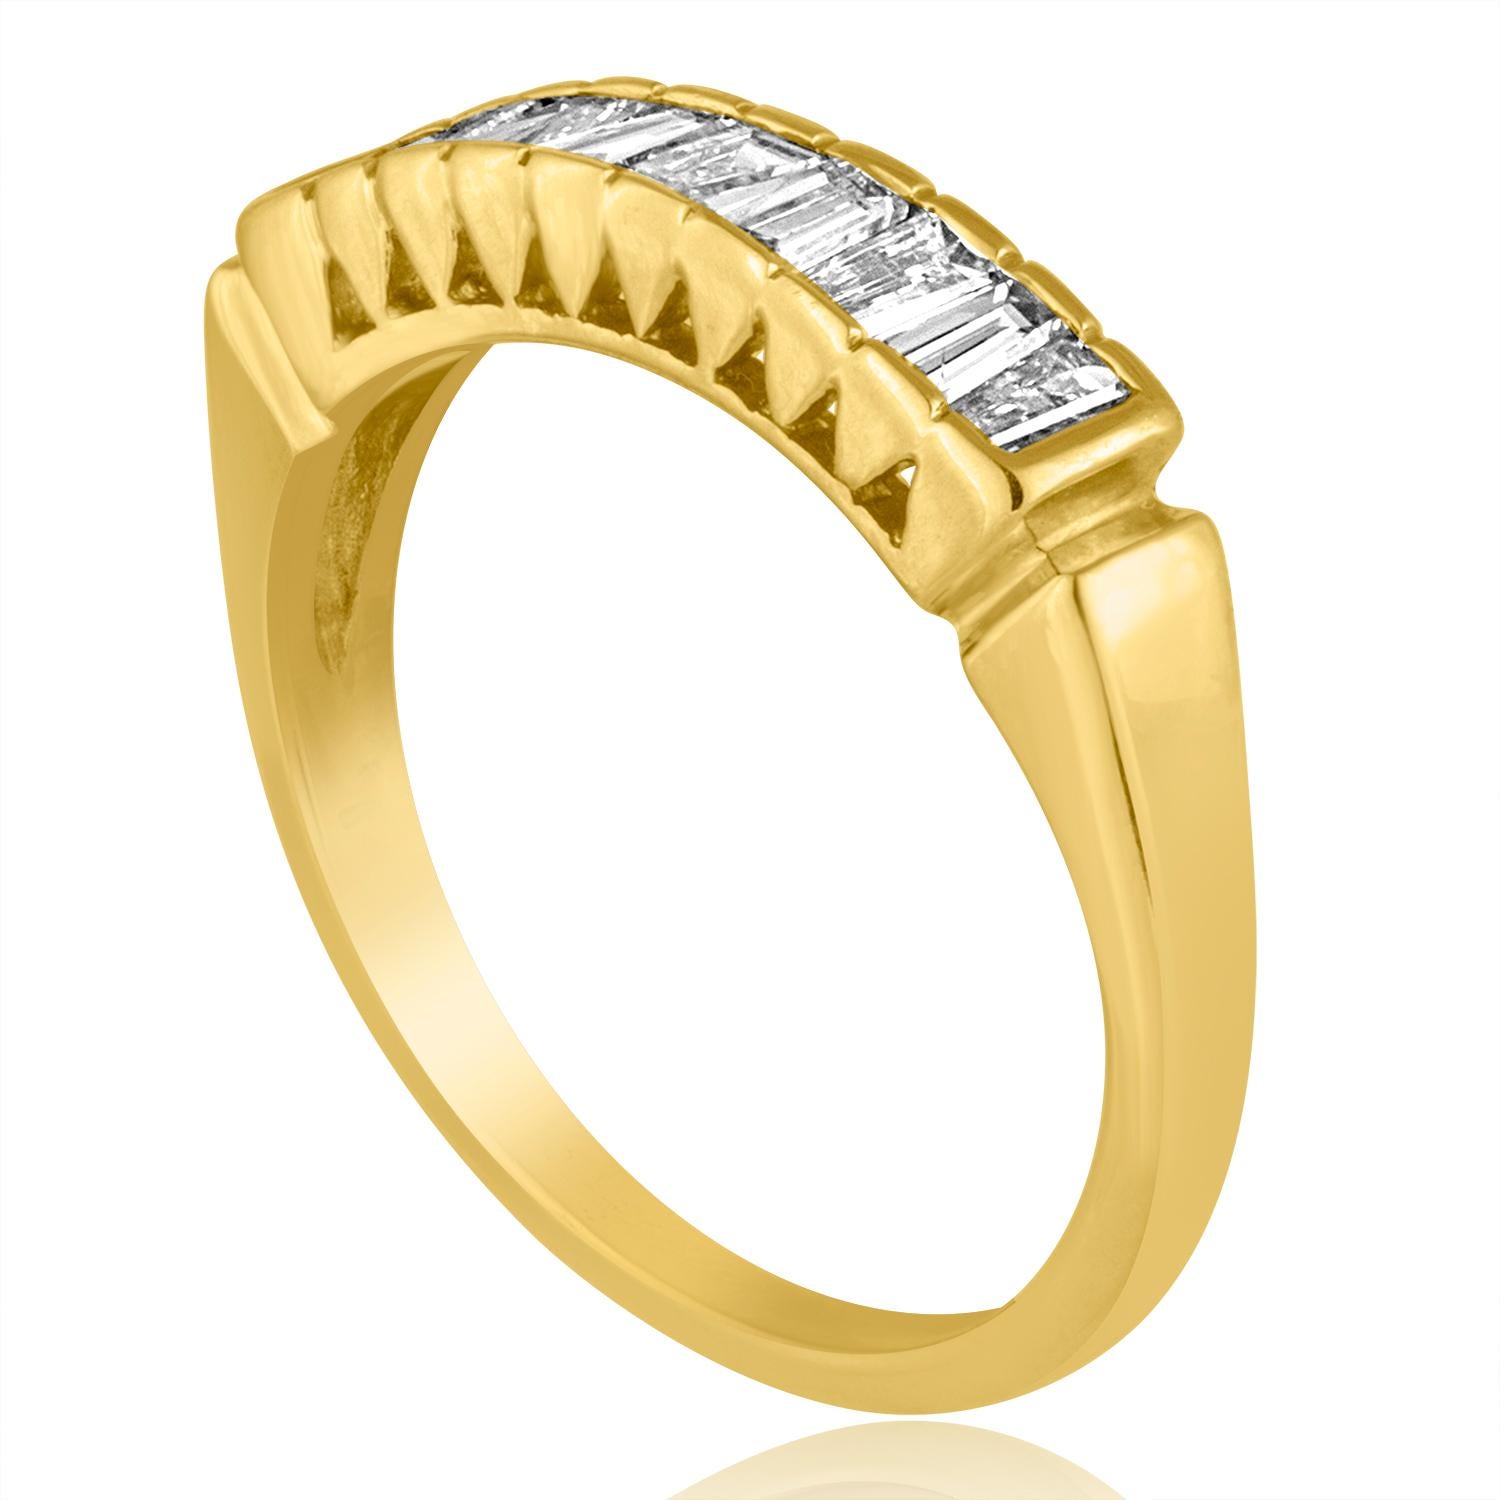 Very Beautiful Half Band Baguette Ring
The ring is 14K Yellow Gold
There are 0.70 Carats in Diamonds F/G VS
The ring weighs 2.1 grams
The ring is a size 4, sizable 1 size up/down.